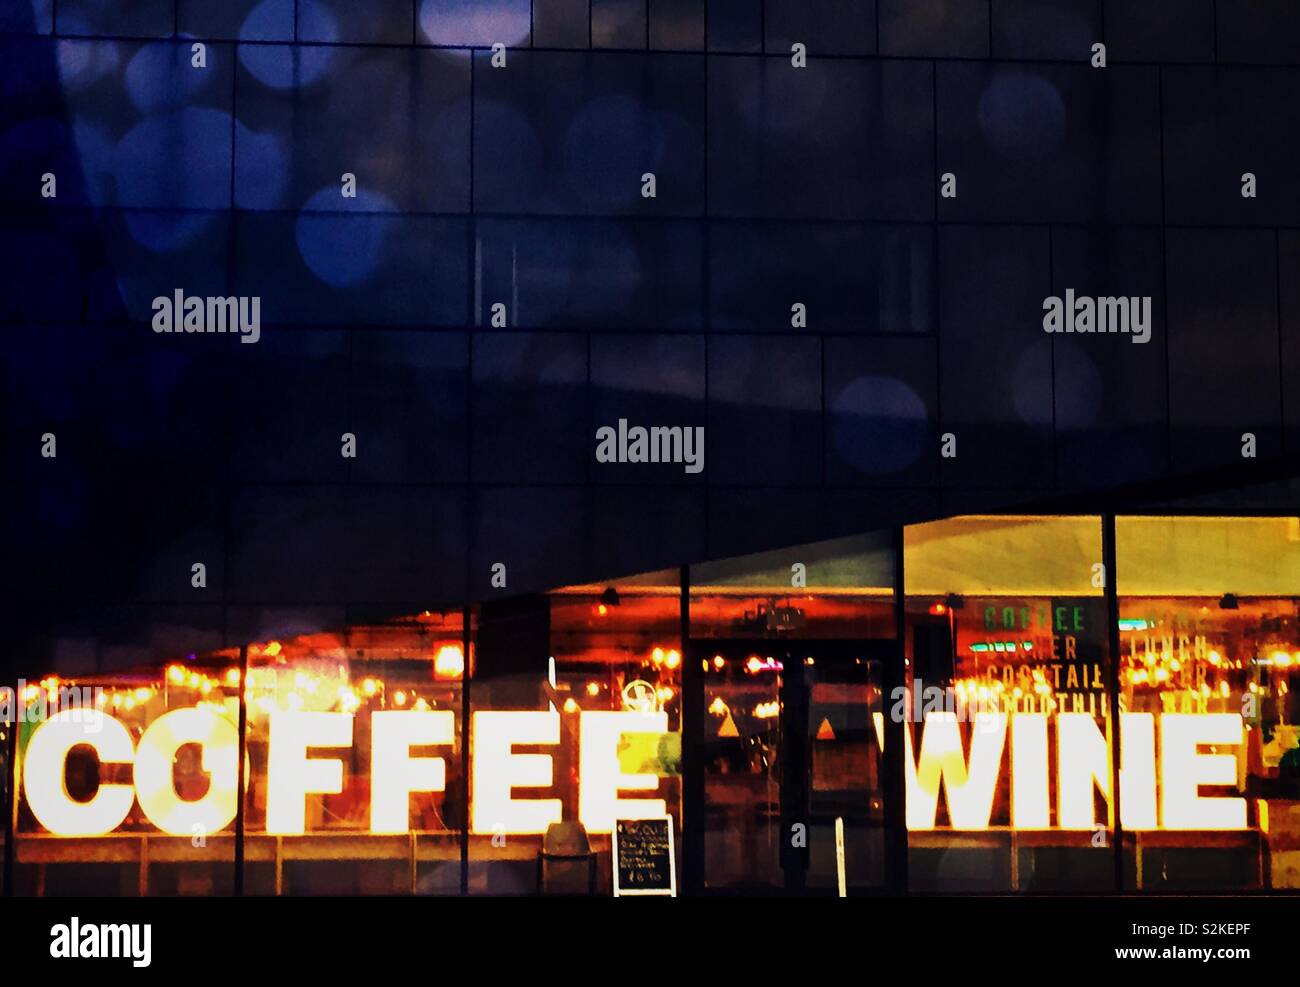 Coffee and wine sign. Coffee shop wine bar lit up at night in city Stock Photo